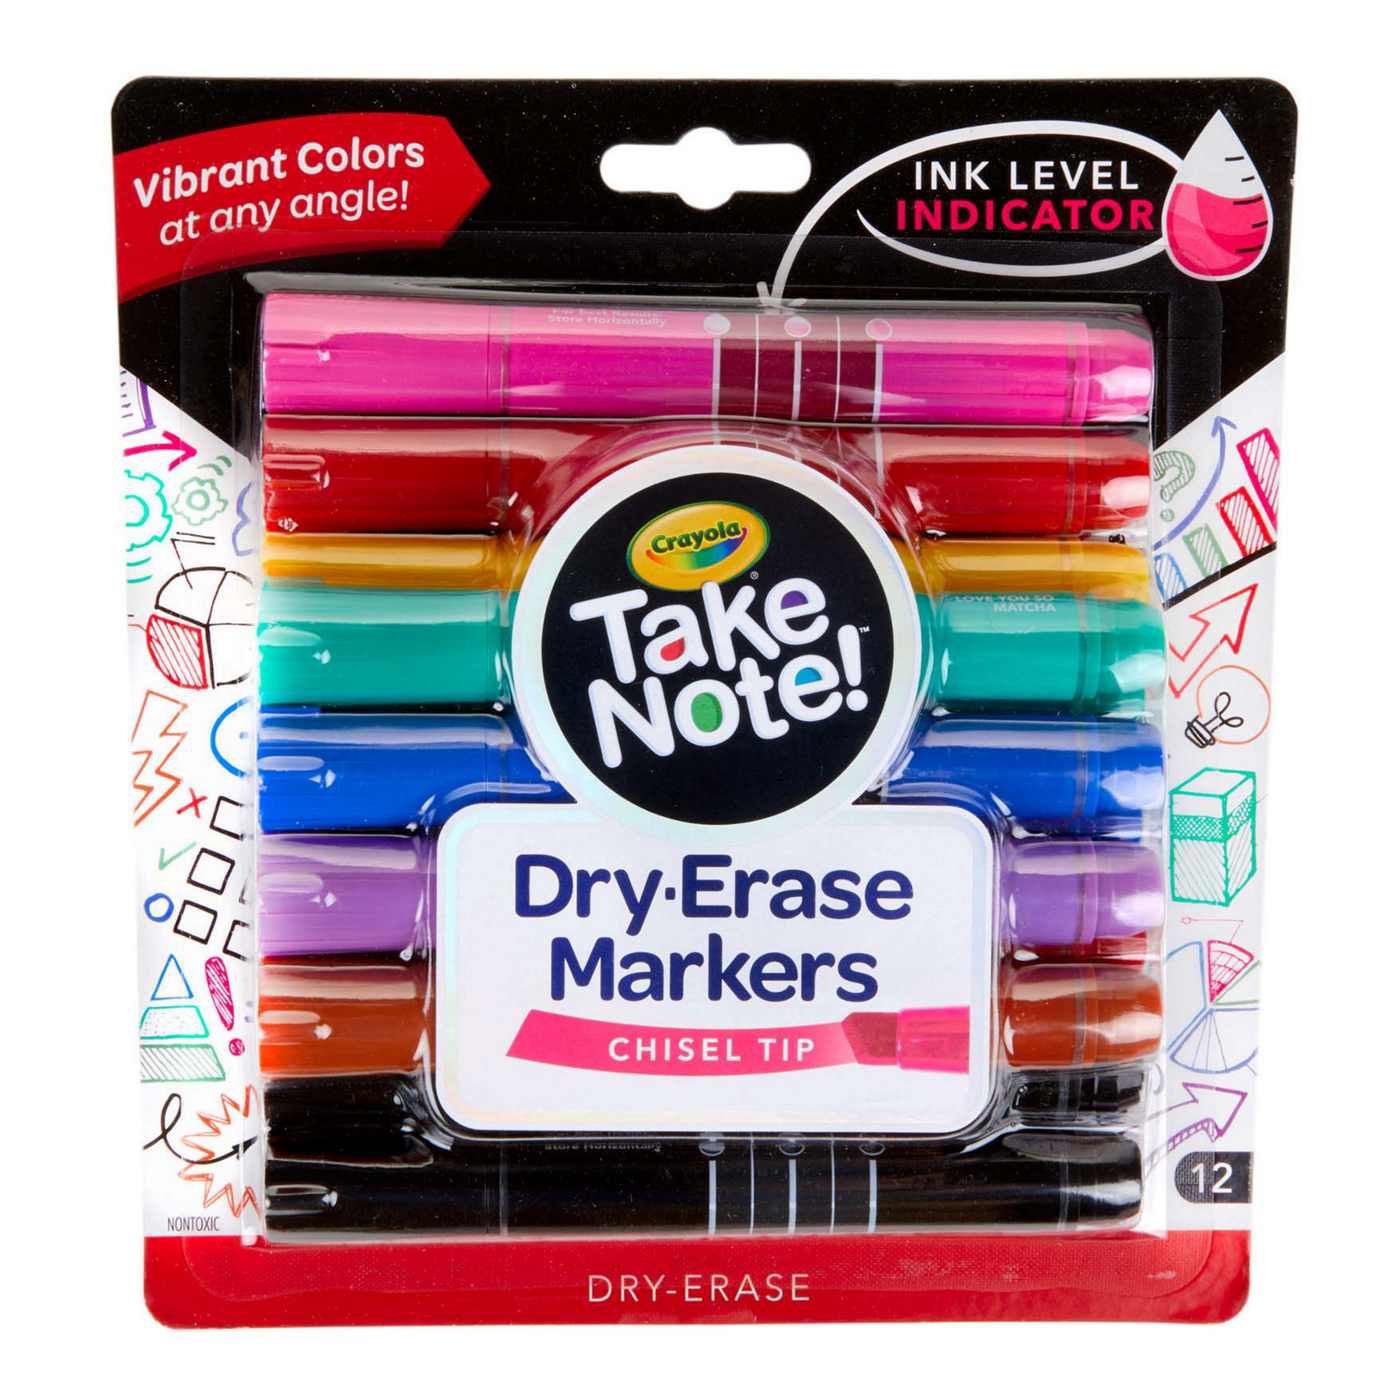 Crayola Take Note Dry Erase Markers - Shop Highlighters & Dry-Erase at H-E-B